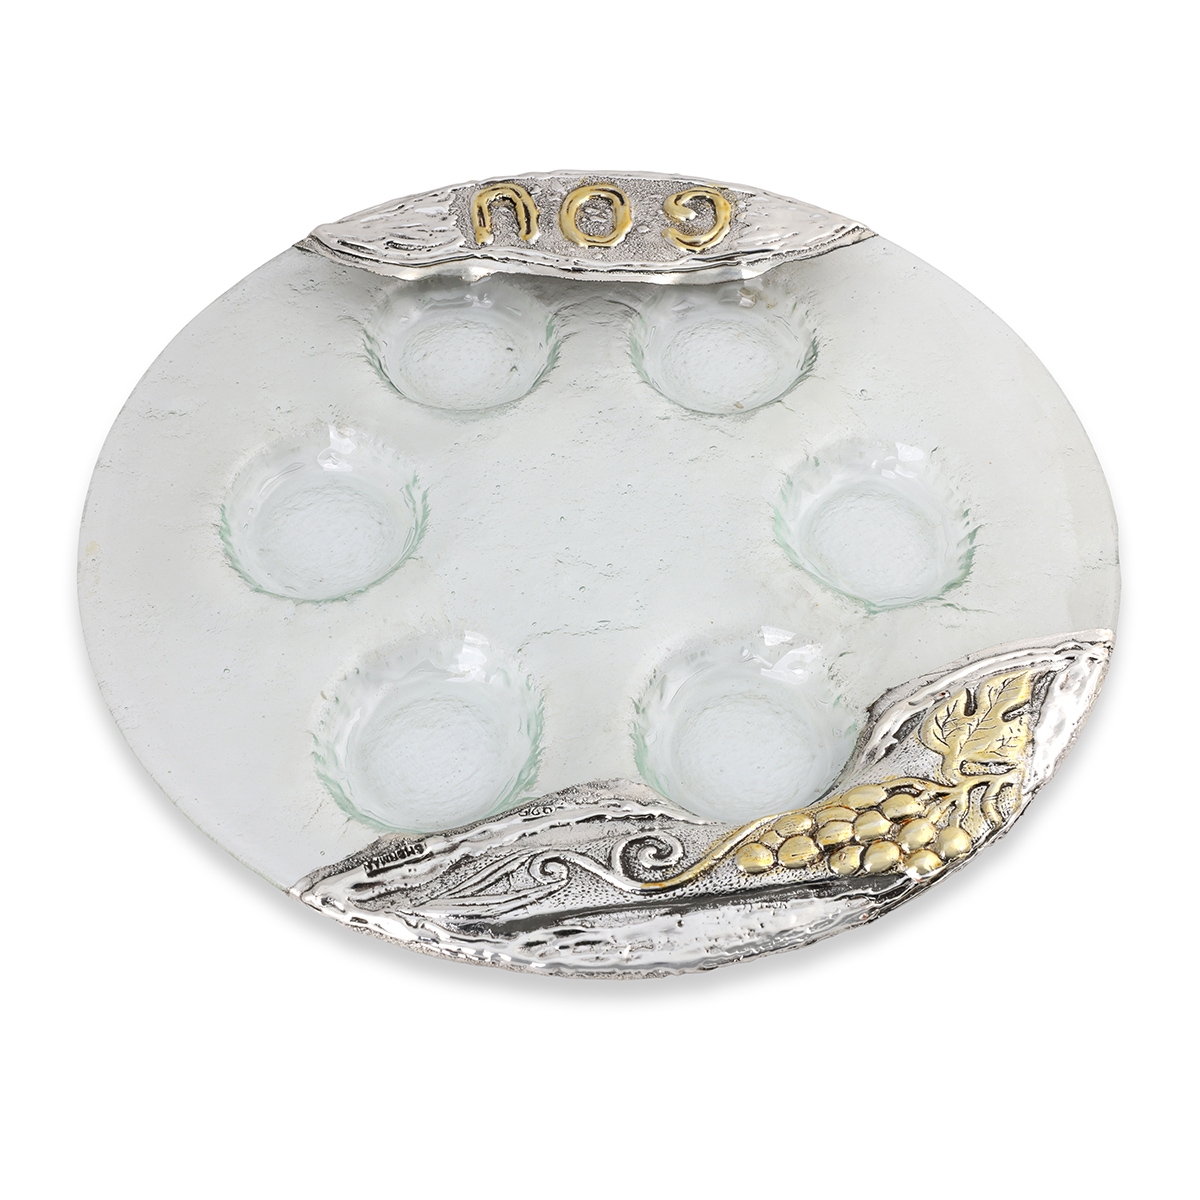 Handcrafted Glass Seder Plate With Grapes Design - 1